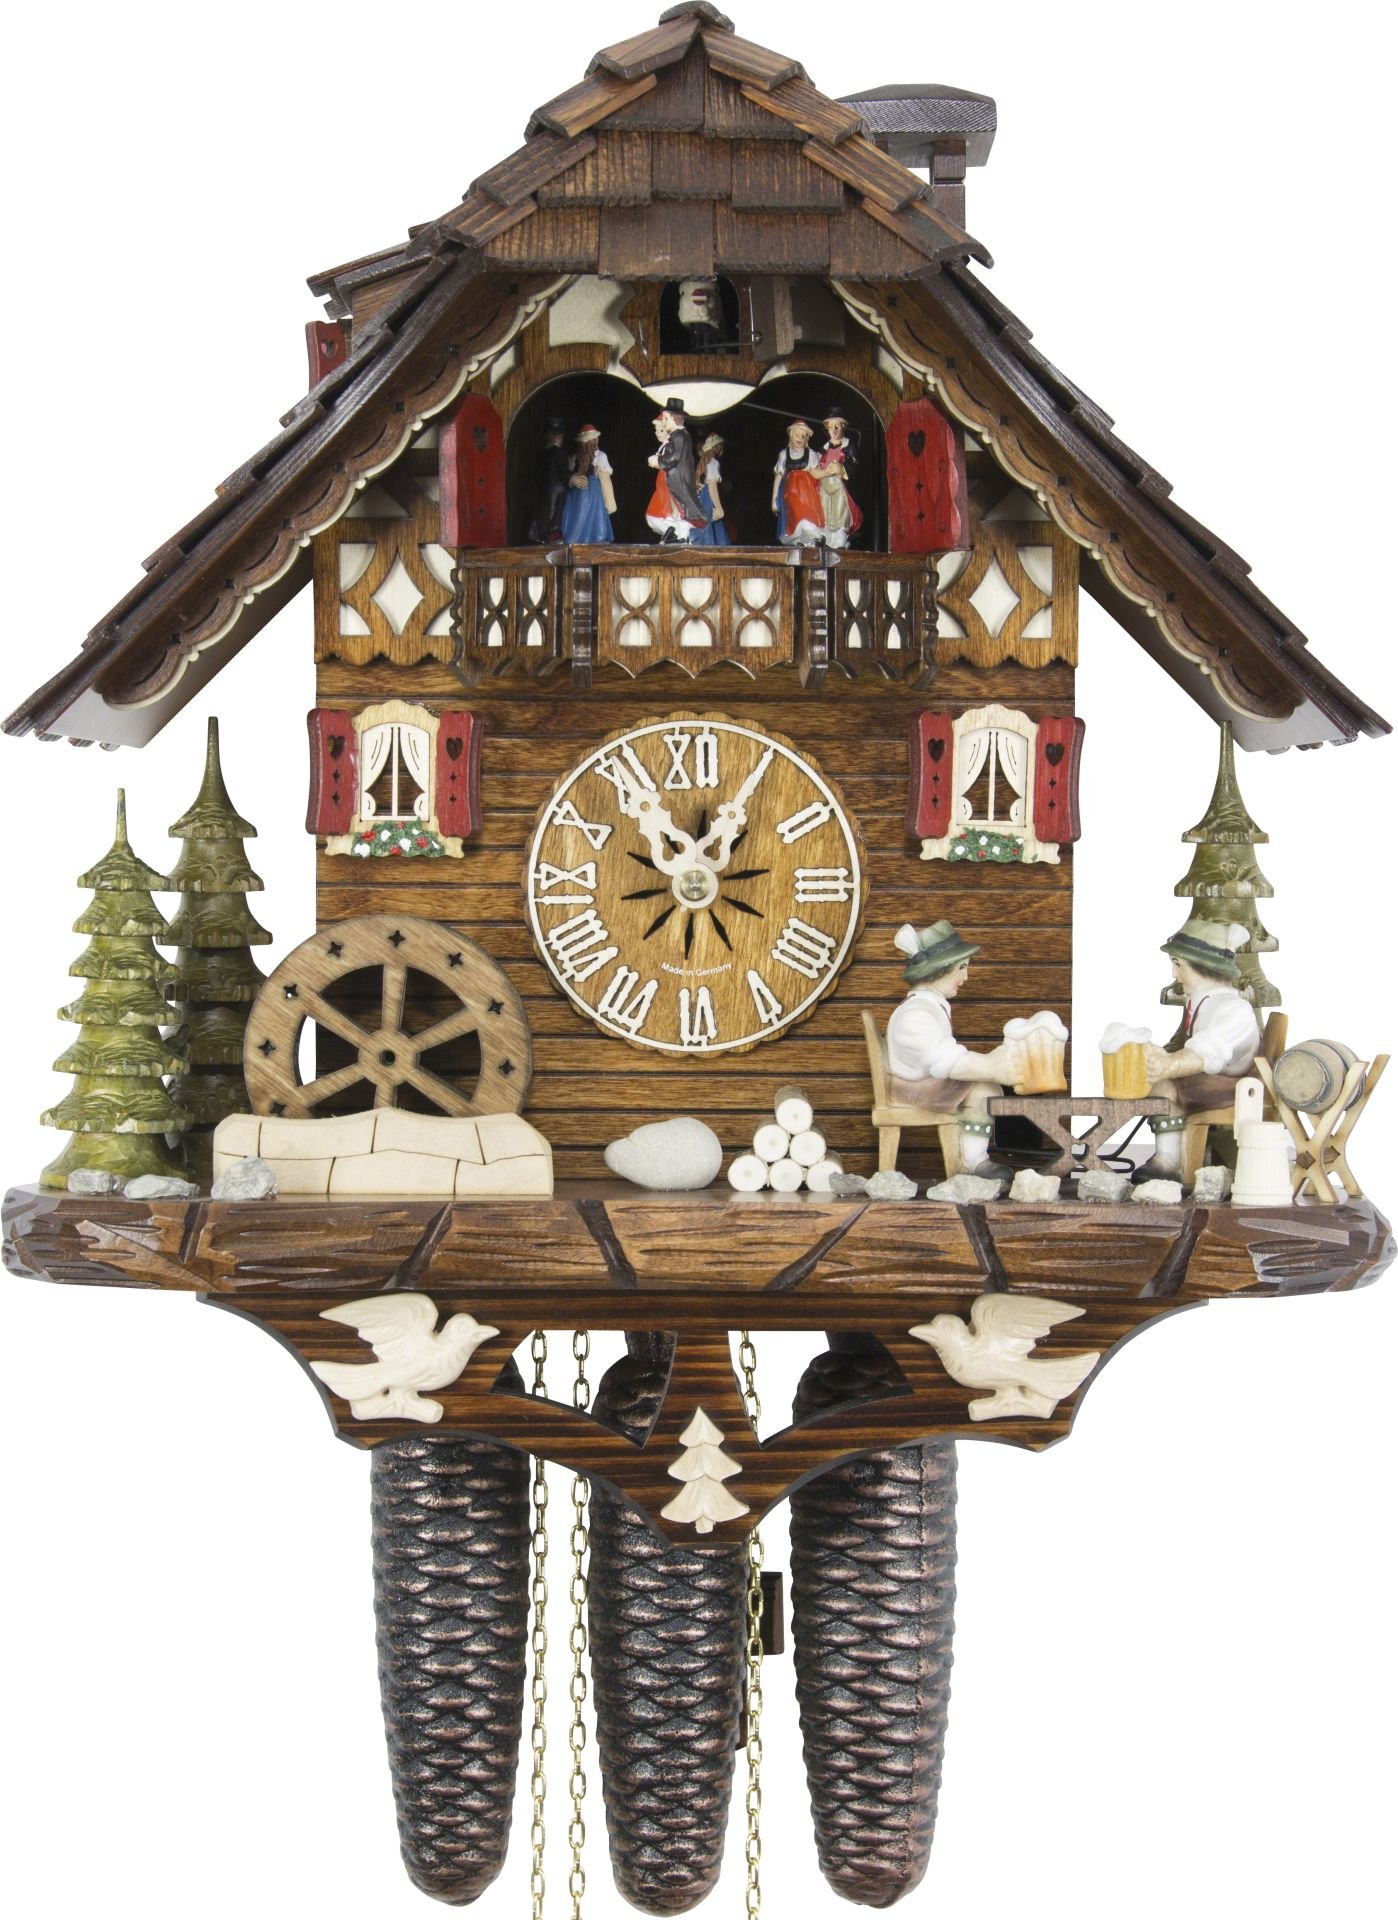 Cuckoo Clock Chalet Style 8 Day Movement 38cm by Hekas